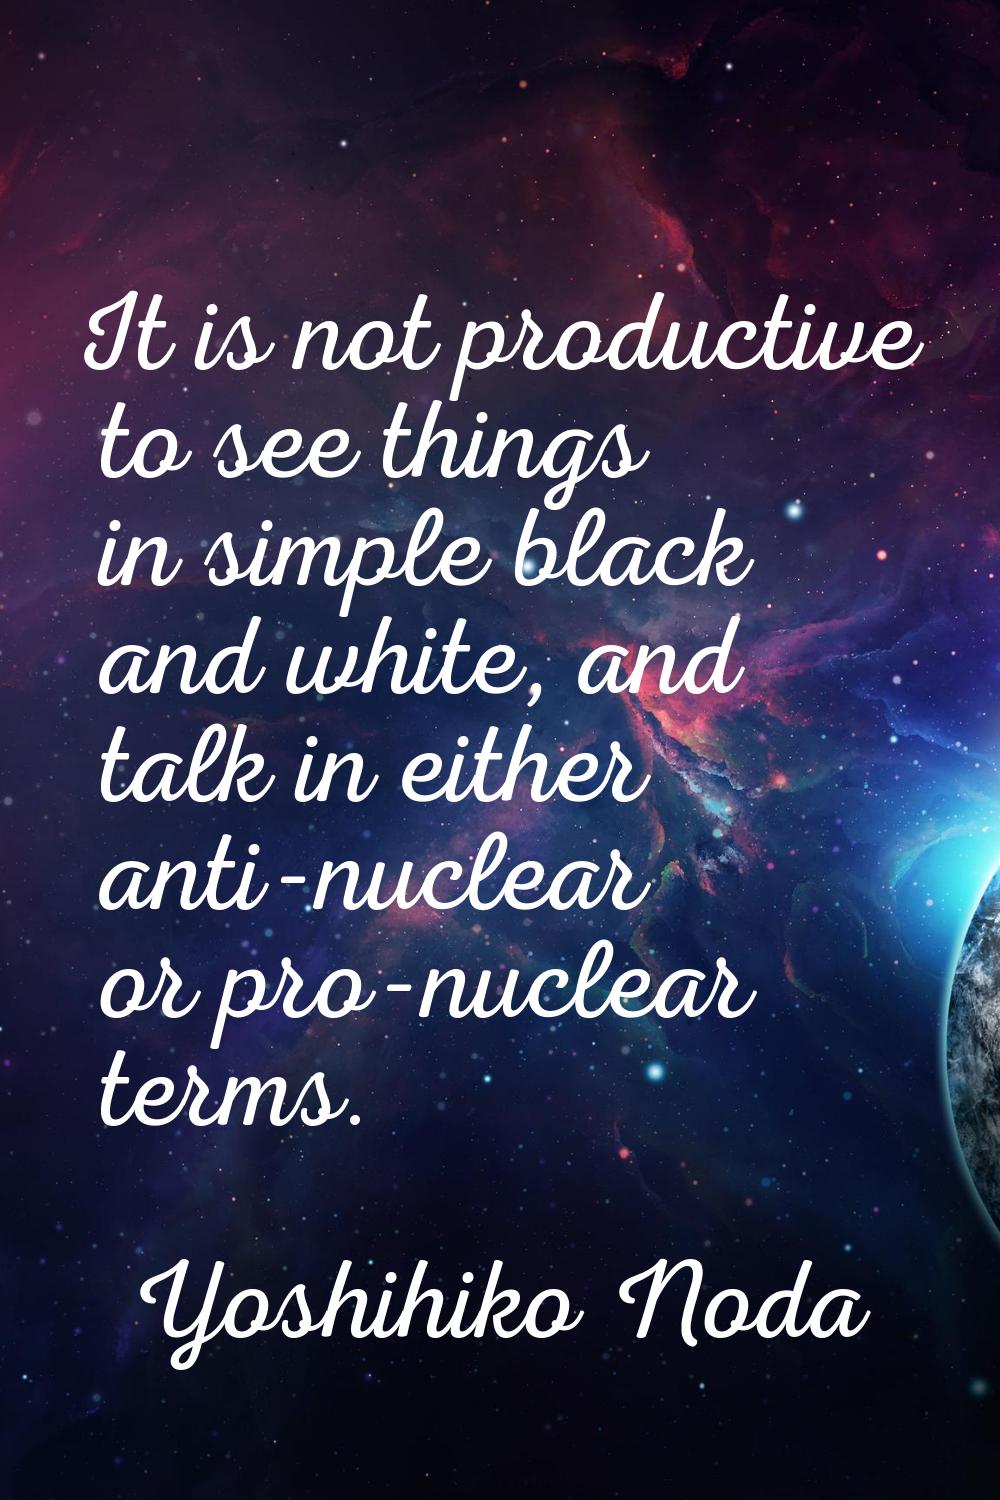 It is not productive to see things in simple black and white, and talk in either anti-nuclear or pr